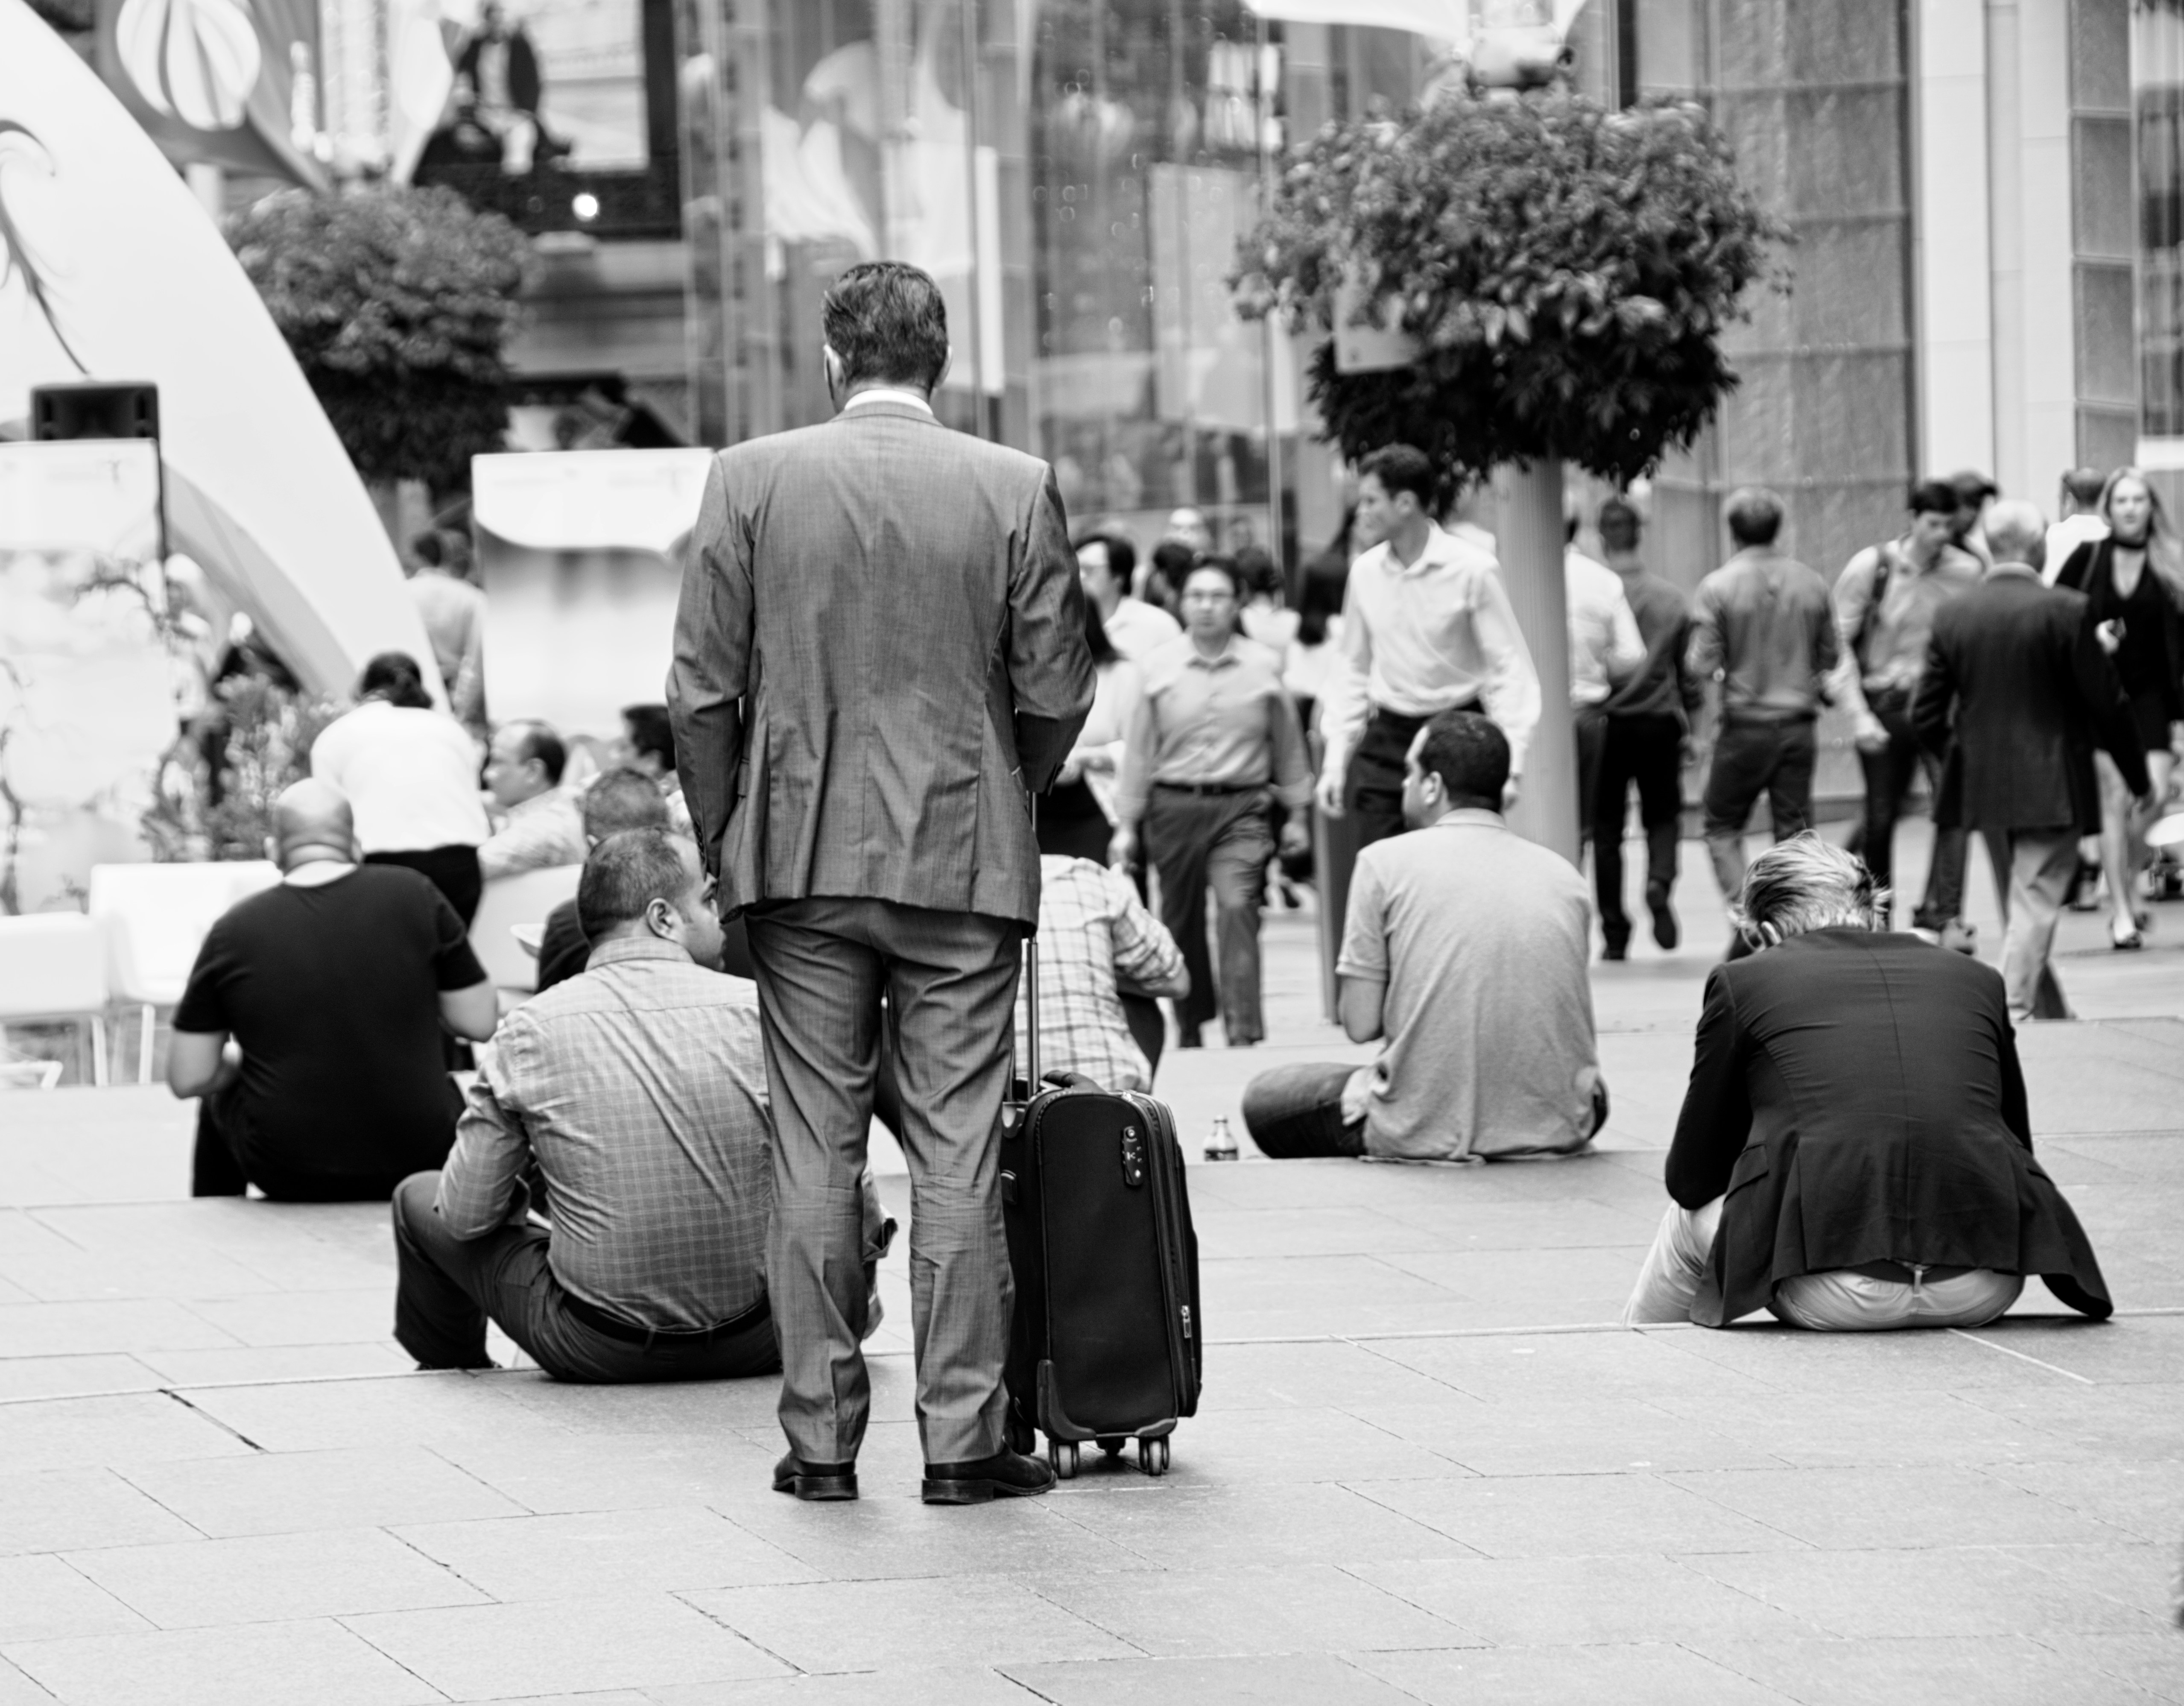 A man with a suitcase standing in the middle of people sitting down.